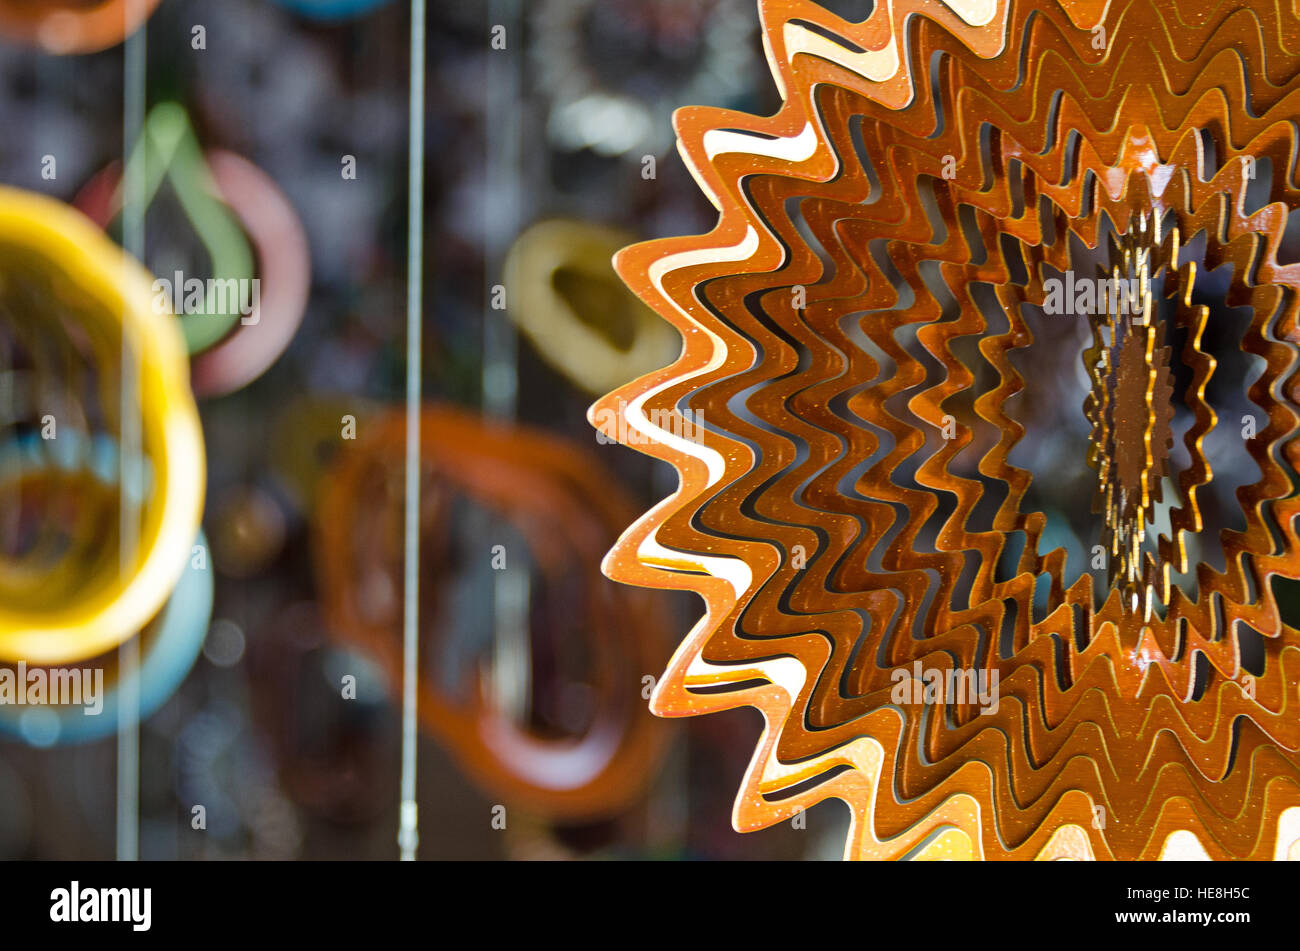 North Adams, USA. 16 Dec, 2016. Detail of a wind spinner from ‘Until,’ an installation by artist Nick Cave at Mass MoCA. Stock Photo